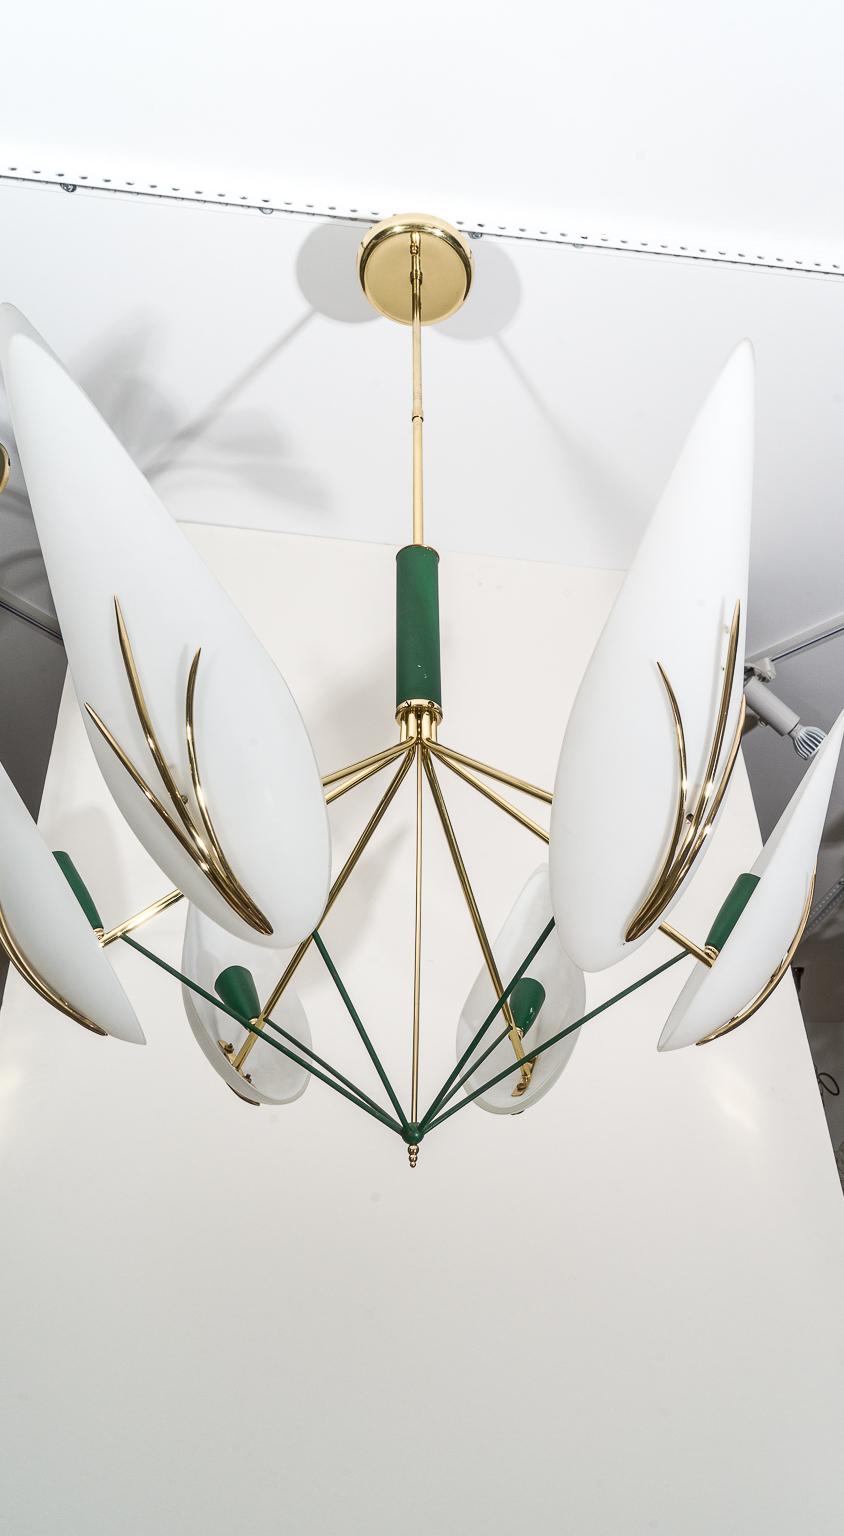 This stylish and chic Mid-Century Modern Stilnovo chandelier will make a subtle understated impact with it form and use of materials.

Note: The brass has been professionally polished and lacquered, so no tarnishing.

Note: The piece has been